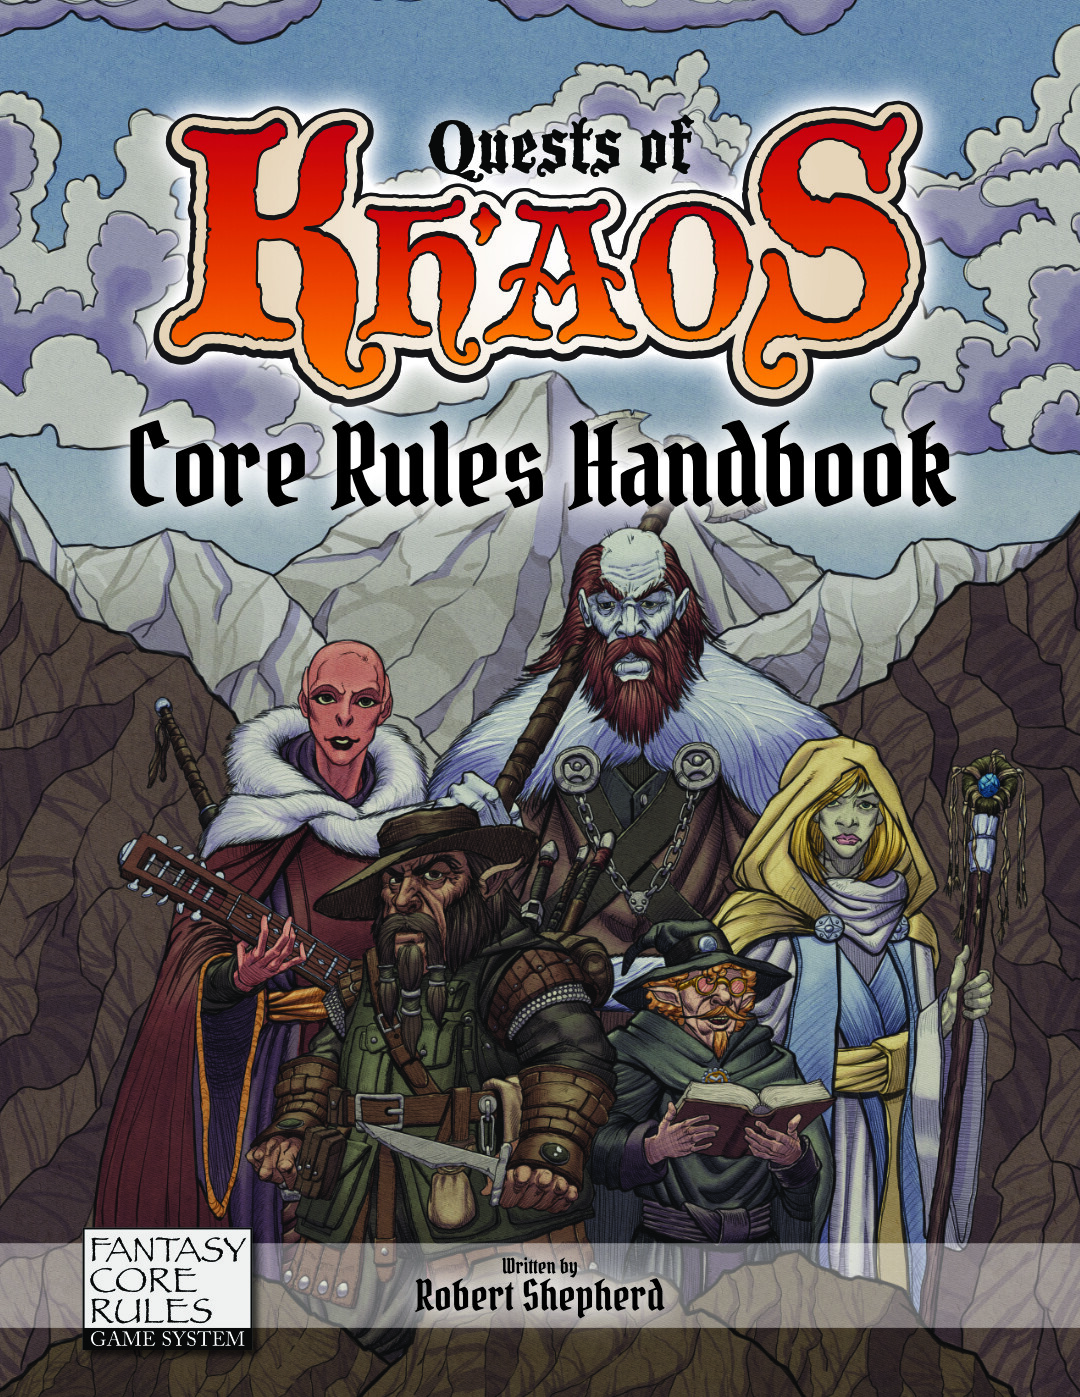 Cover design for the Quests of Kh'Aos Core Rules Handbook